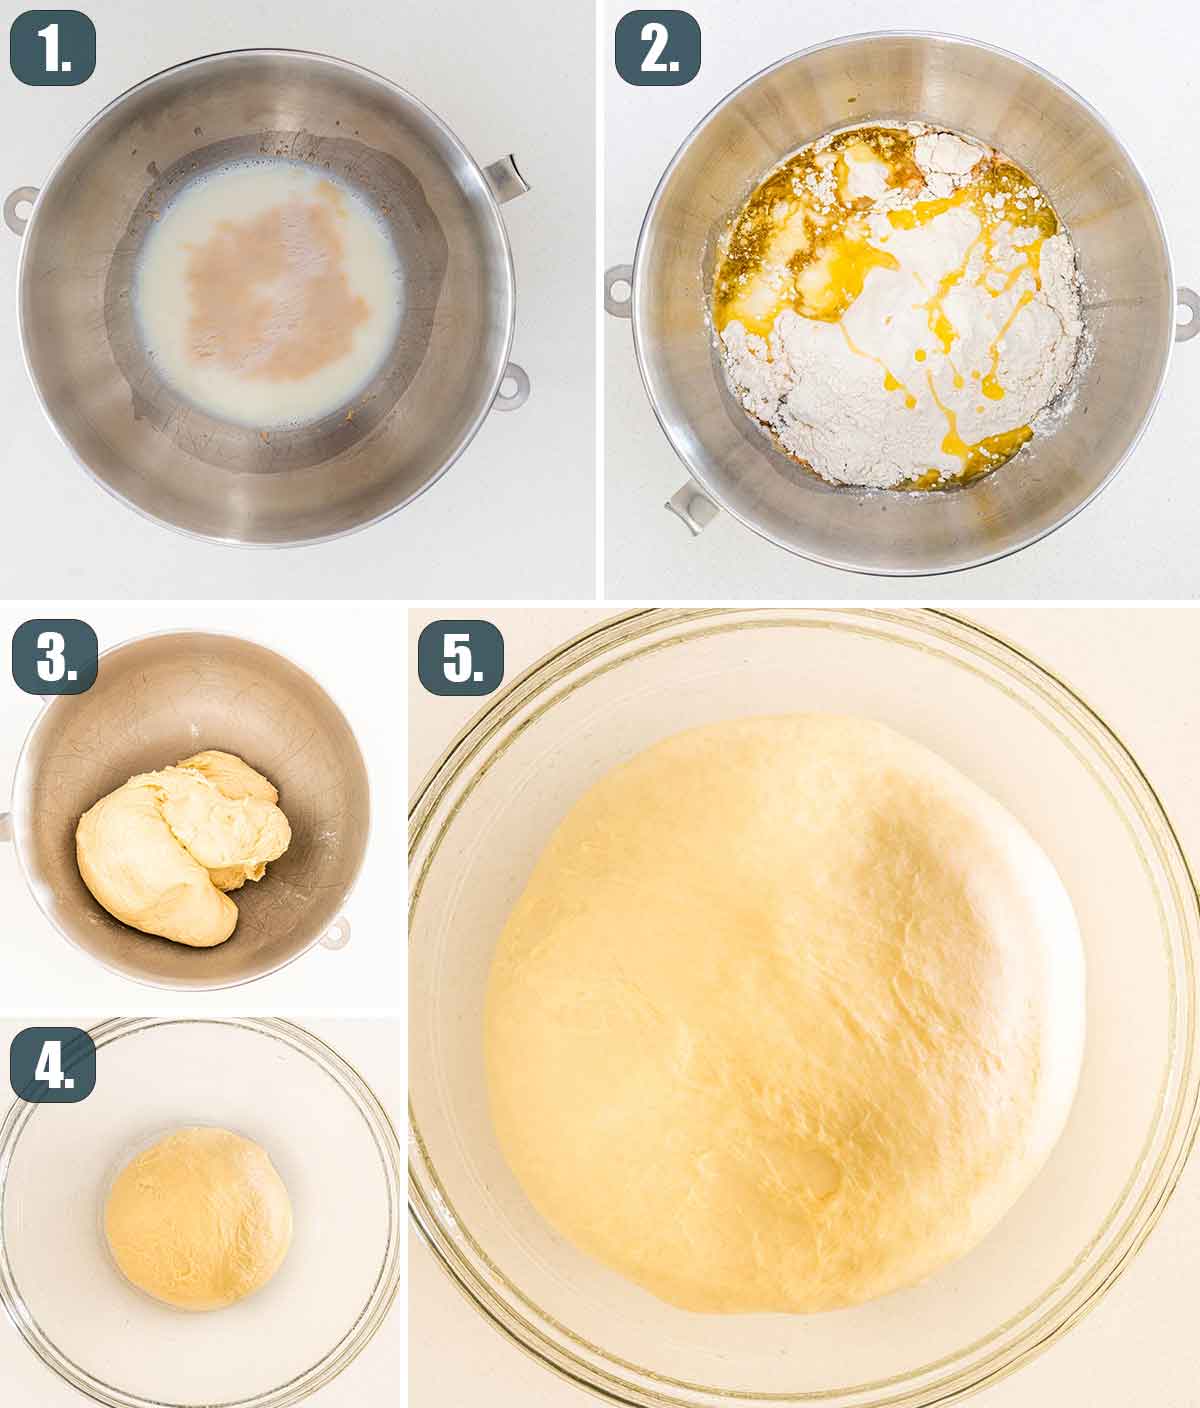 process shots showing how to make dough for donuts.